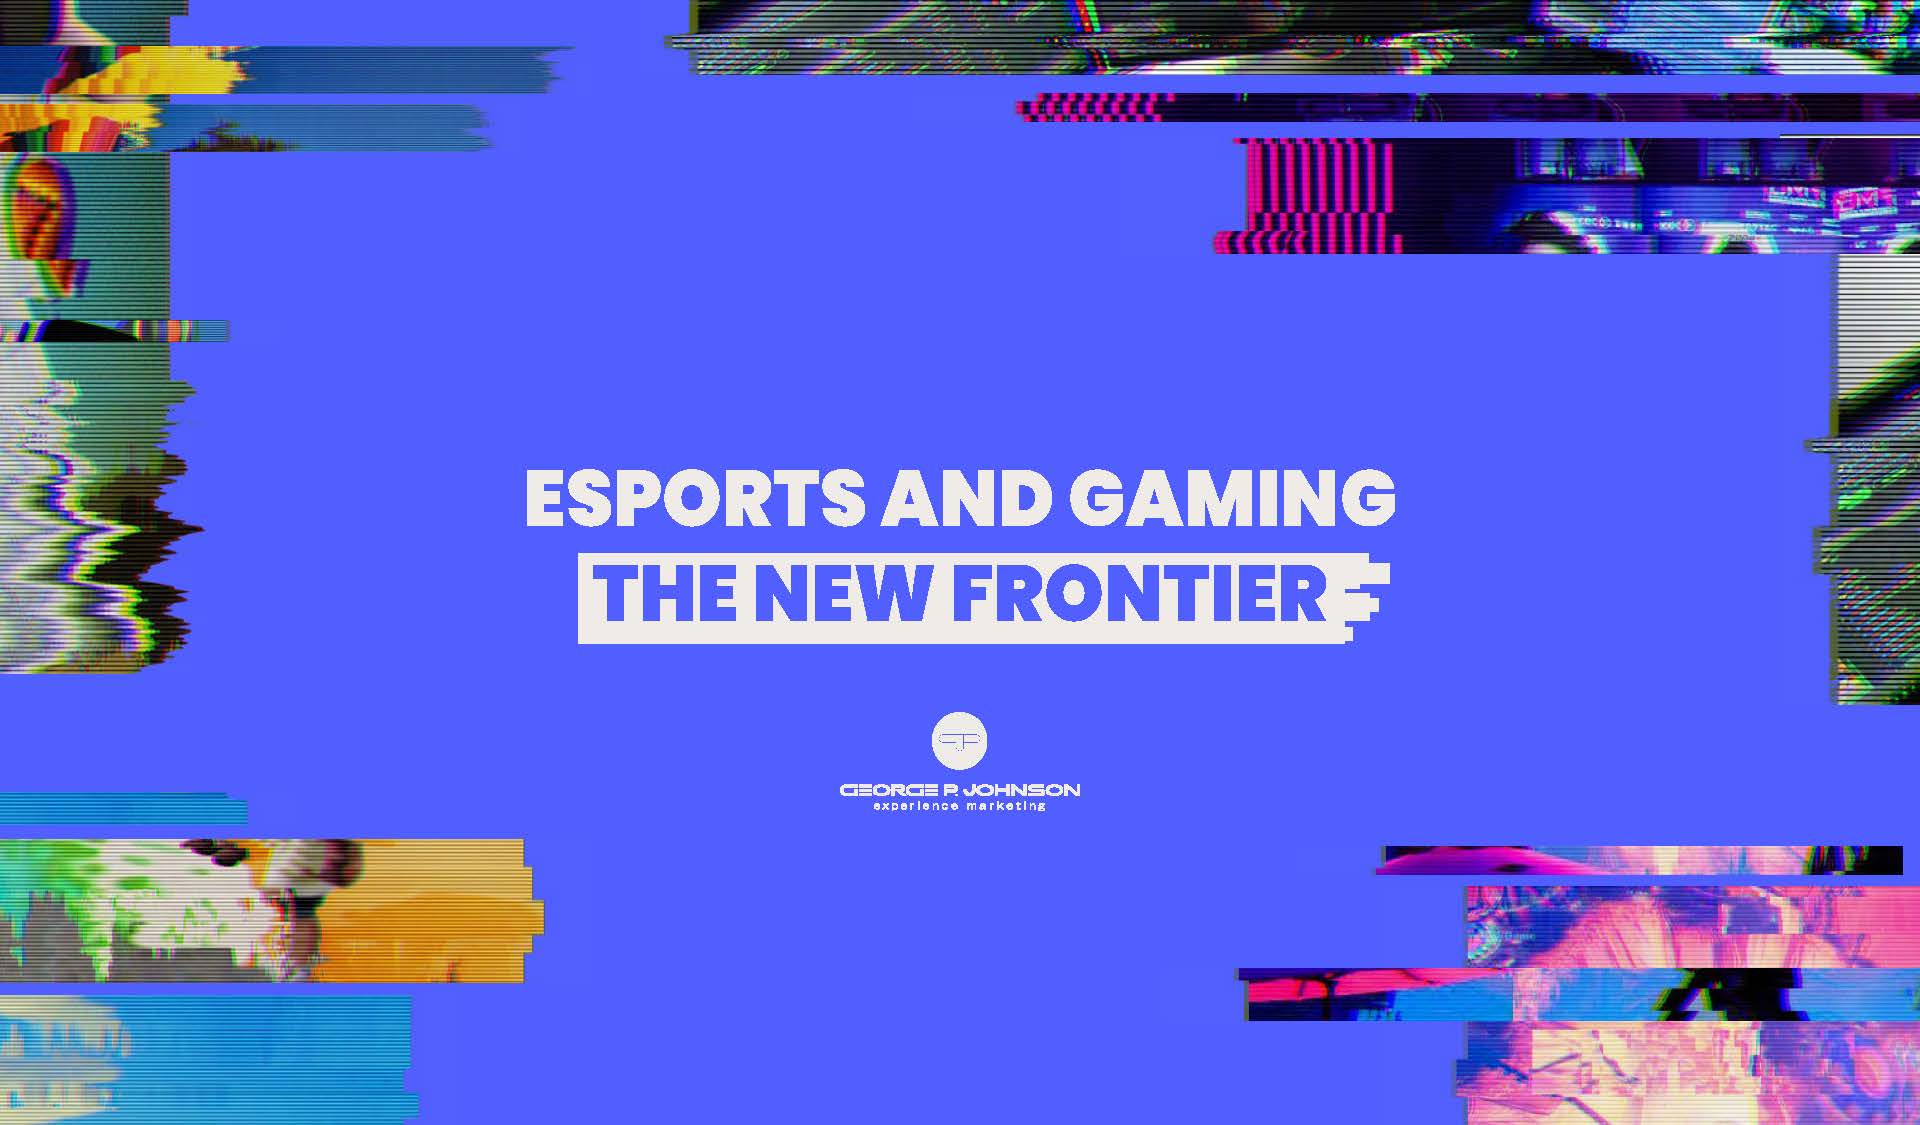 ESPORTS AND GAMING
THE NEW FRONTIER